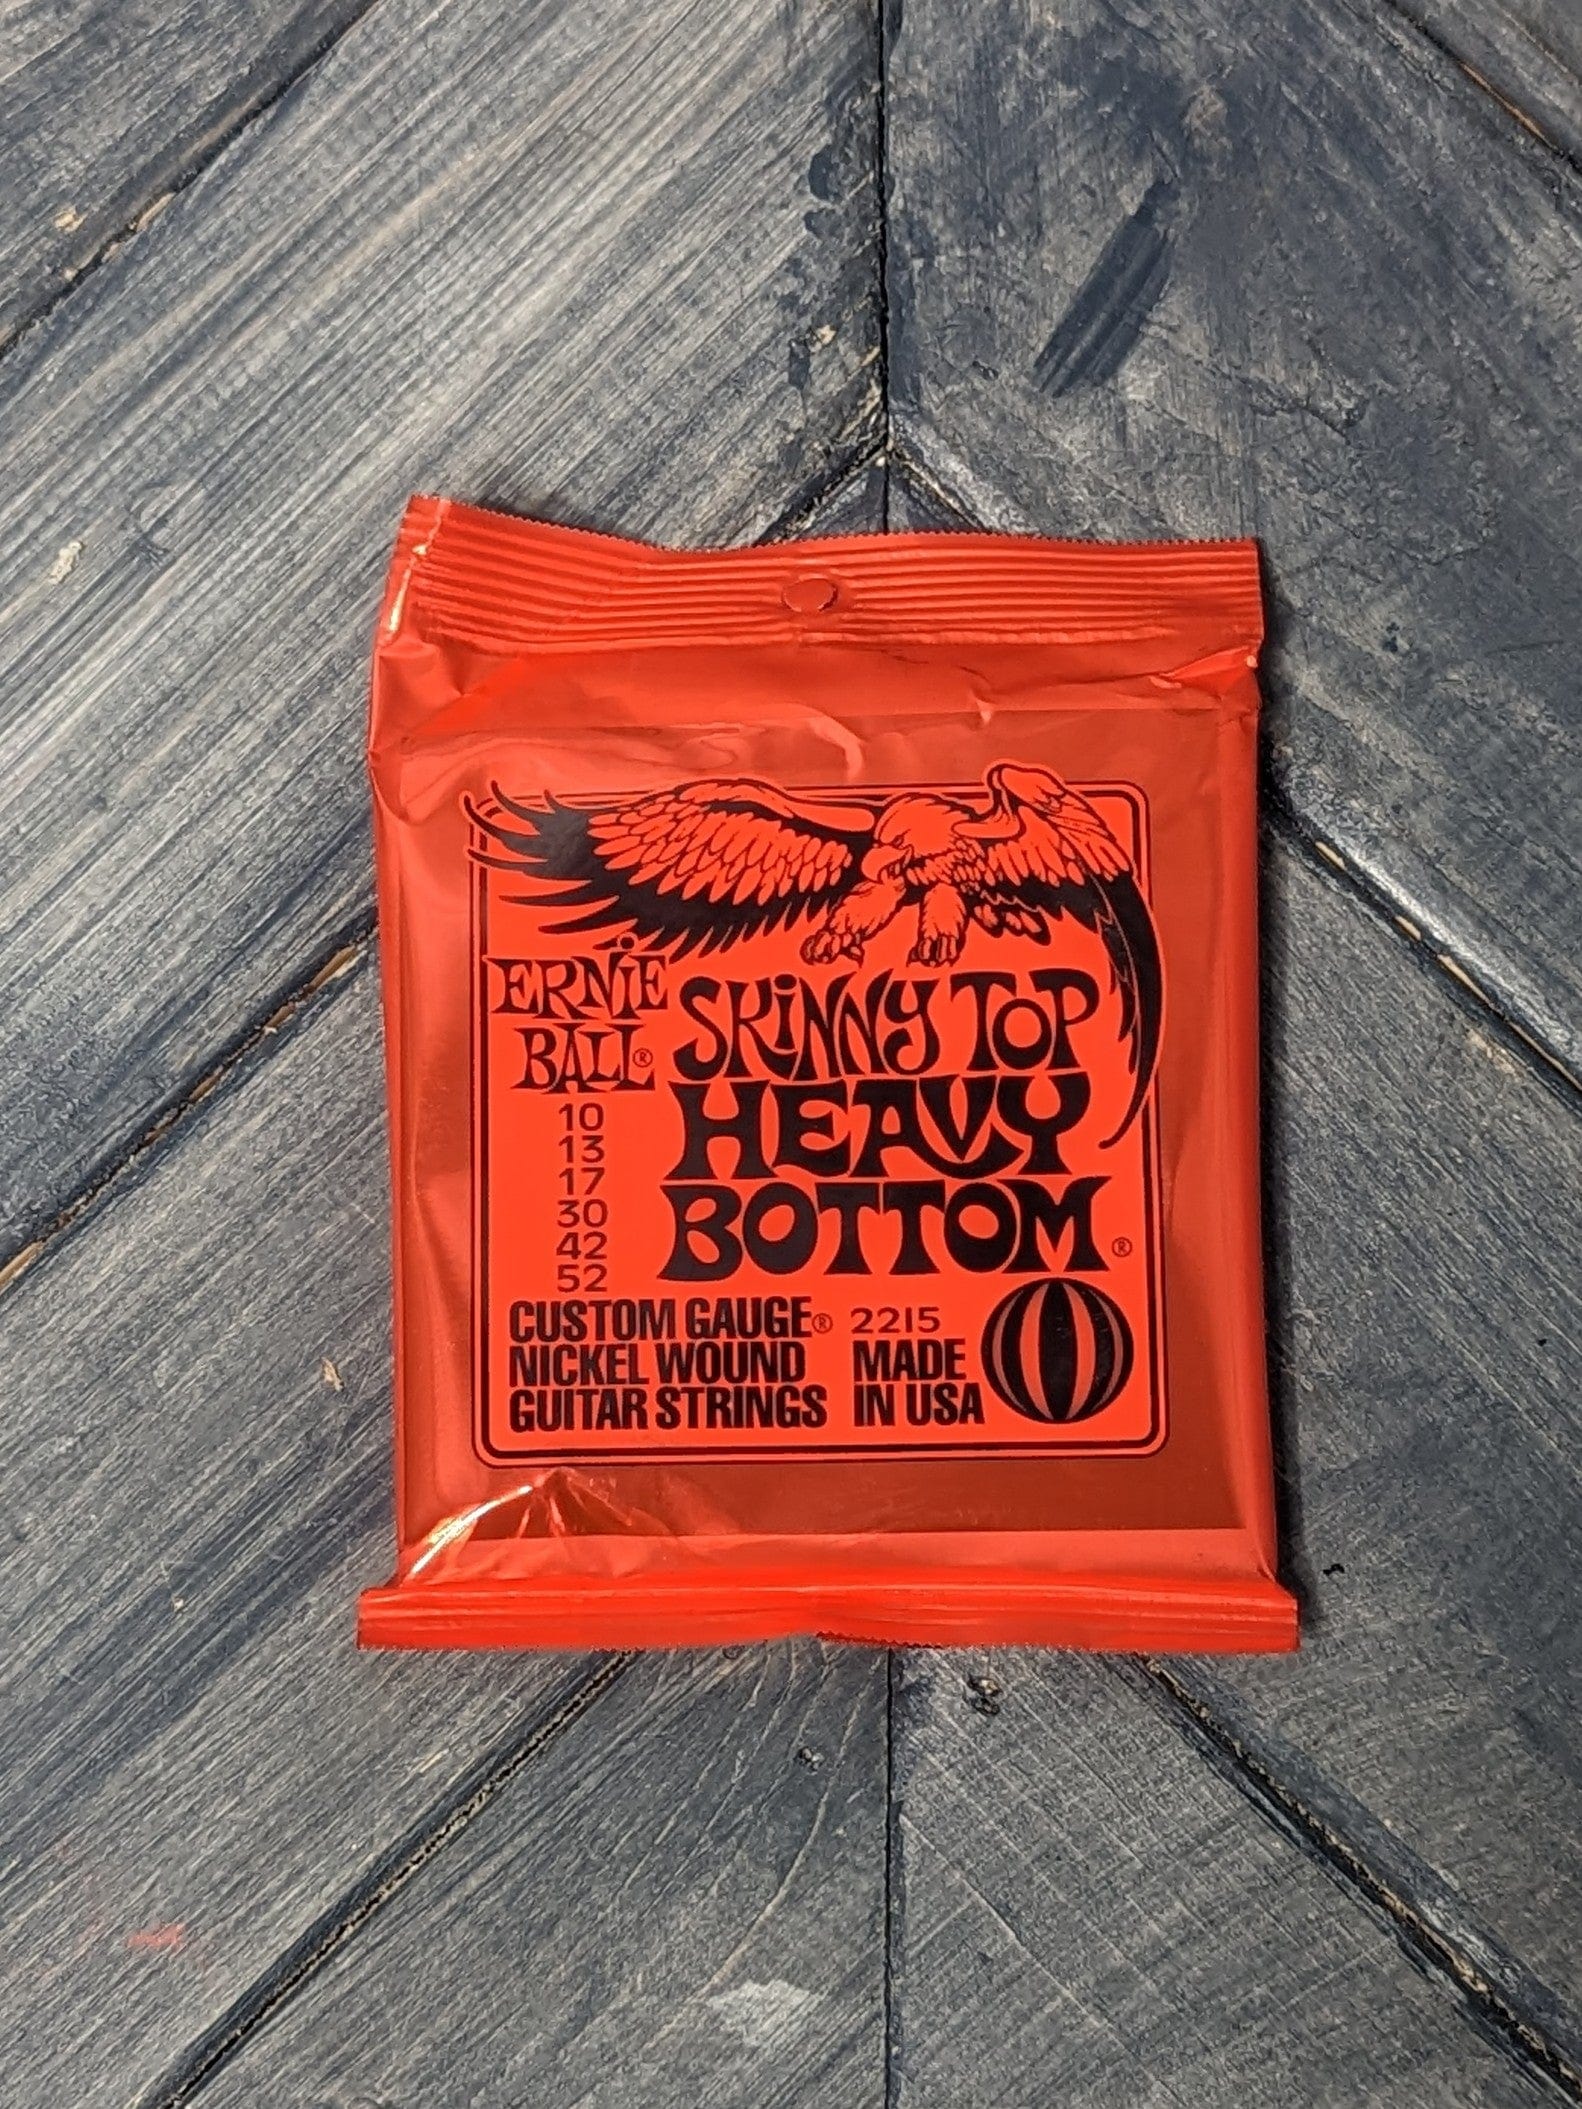 Ernie Ball Skinny Top Heavy Bottom front of the packaging